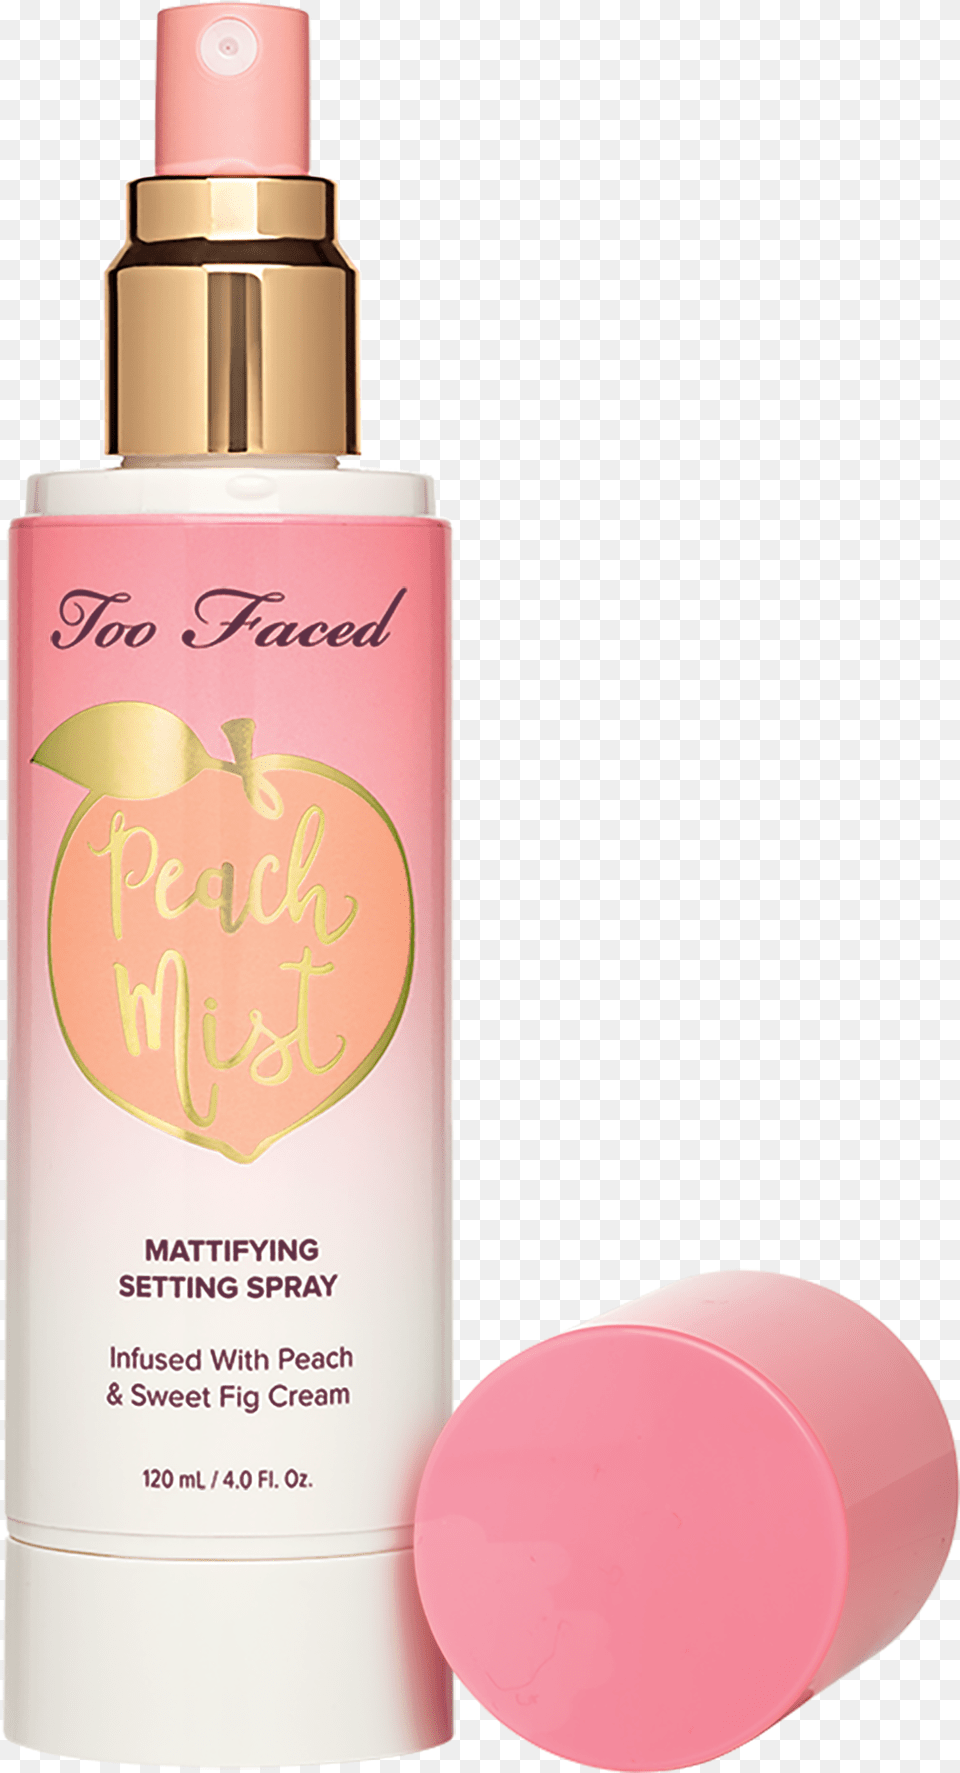 Too Faced Peach Mist, Cosmetics, Lipstick, Bottle, Lotion Png Image